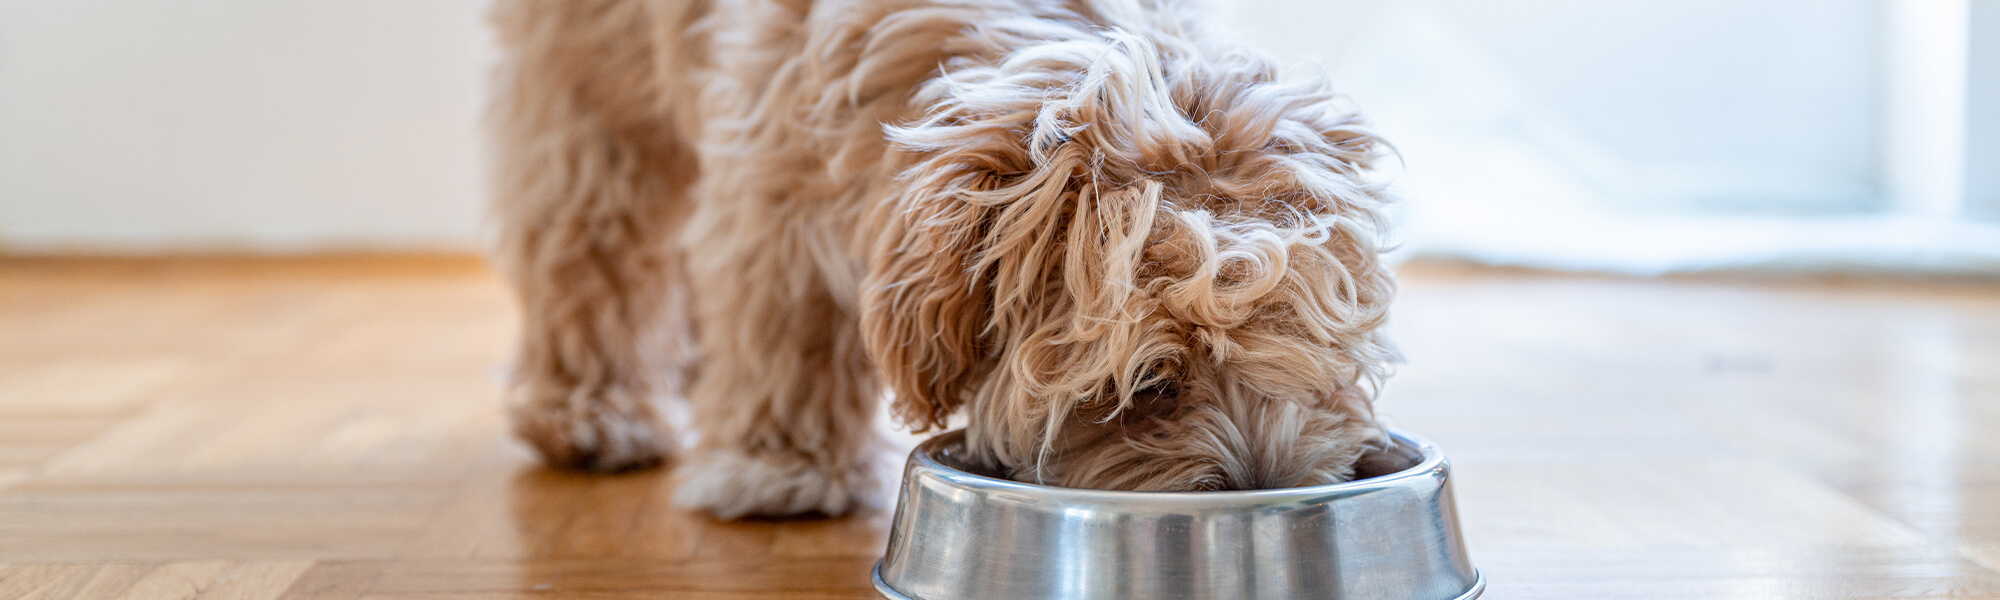 Small Dog Eating From Bowl